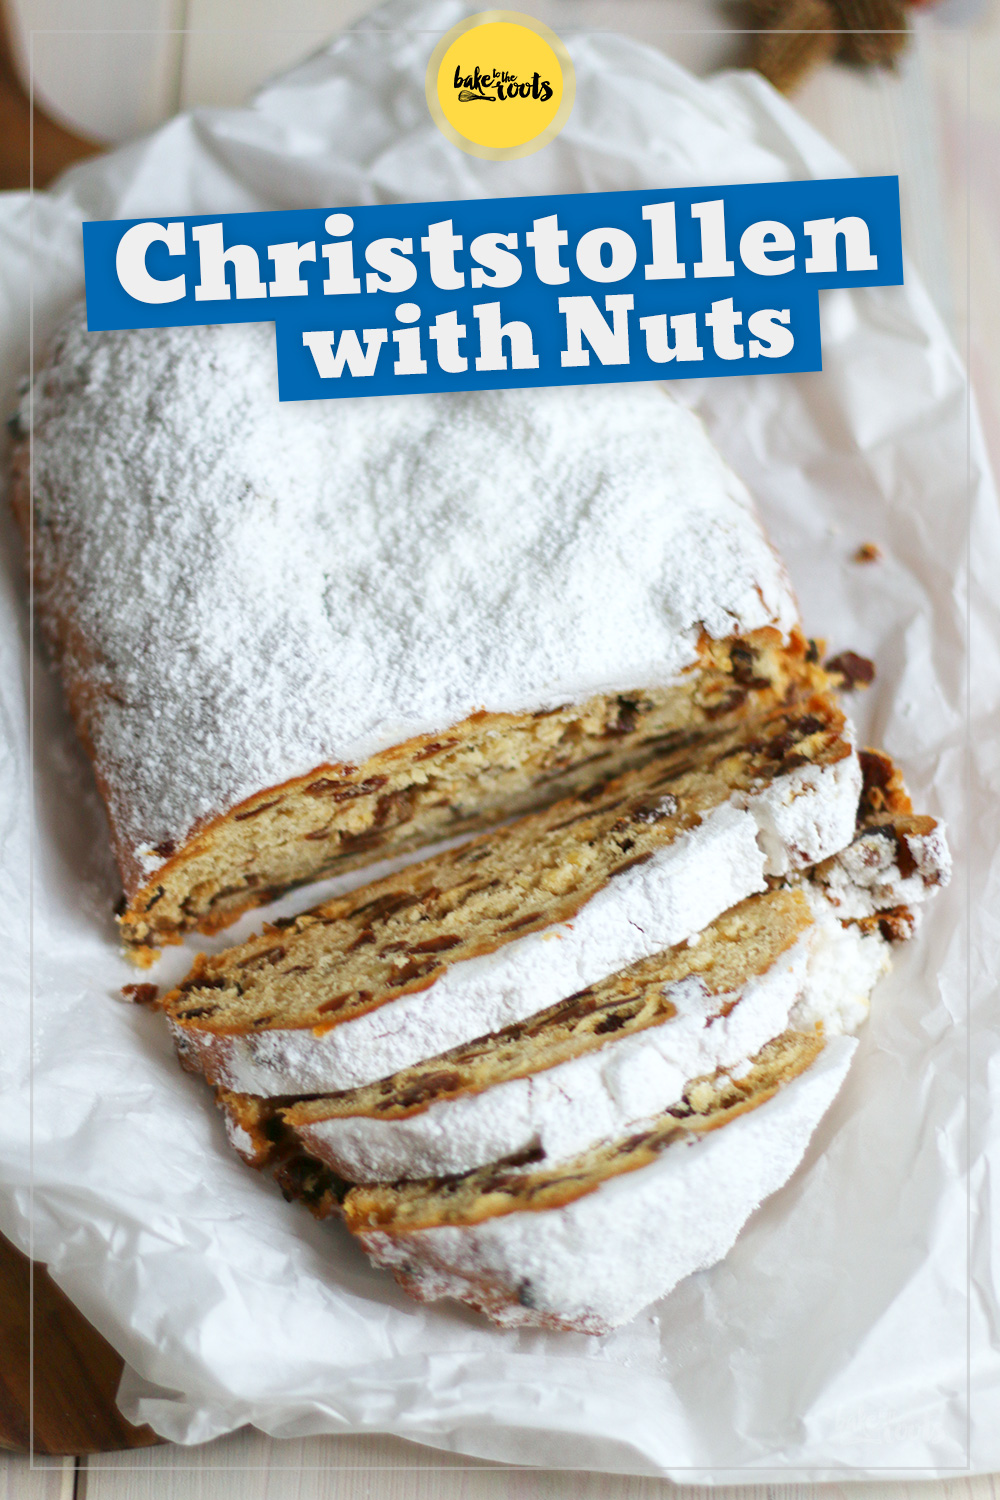 Christstollen with Nuts | Bake to the roots